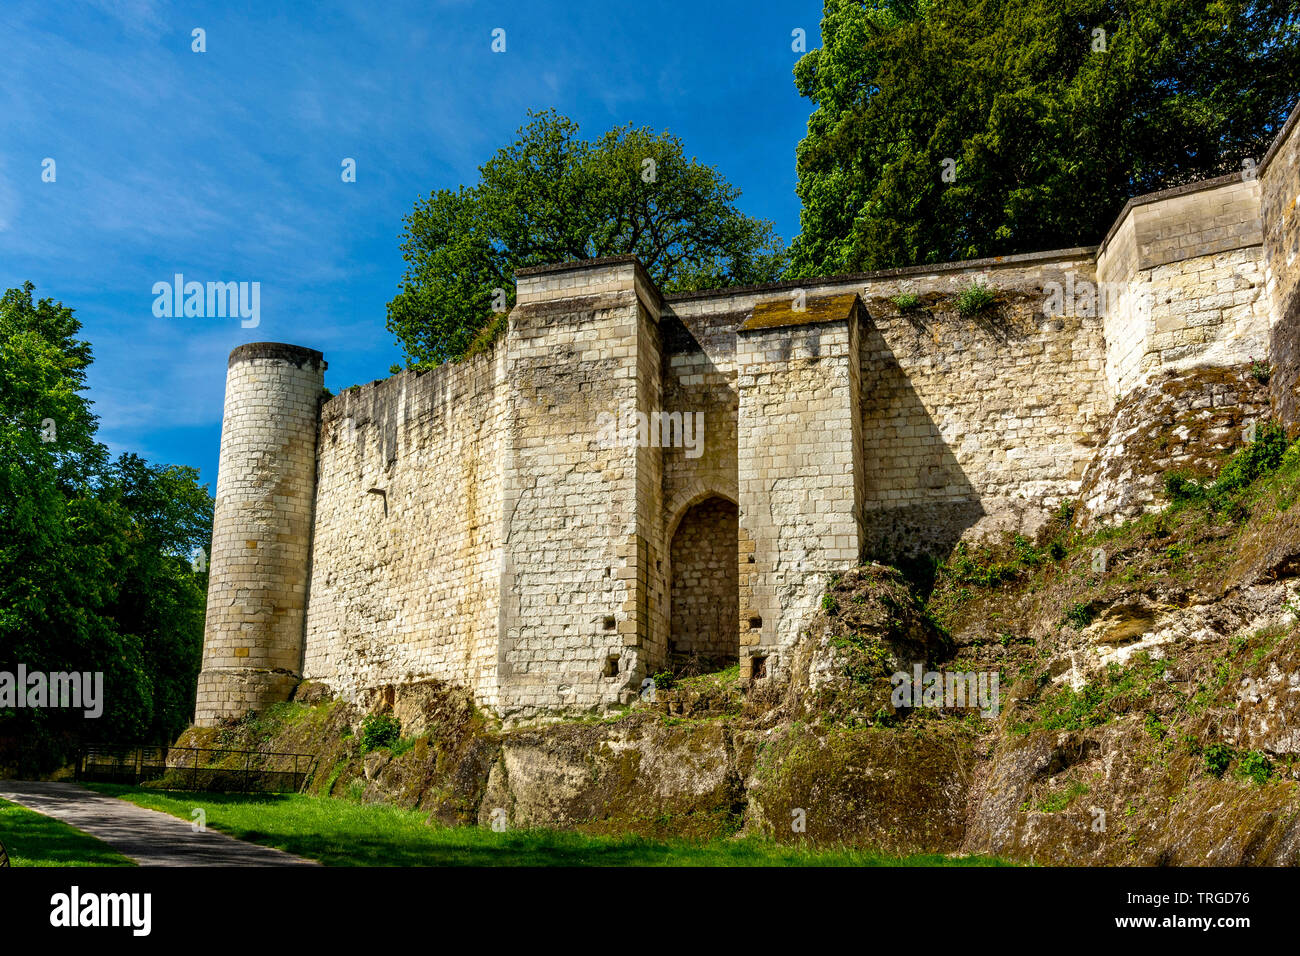 Battlements and towers of Royal city of Loches, Indre et Loire, Centre Val de Loire, France Stock Photo